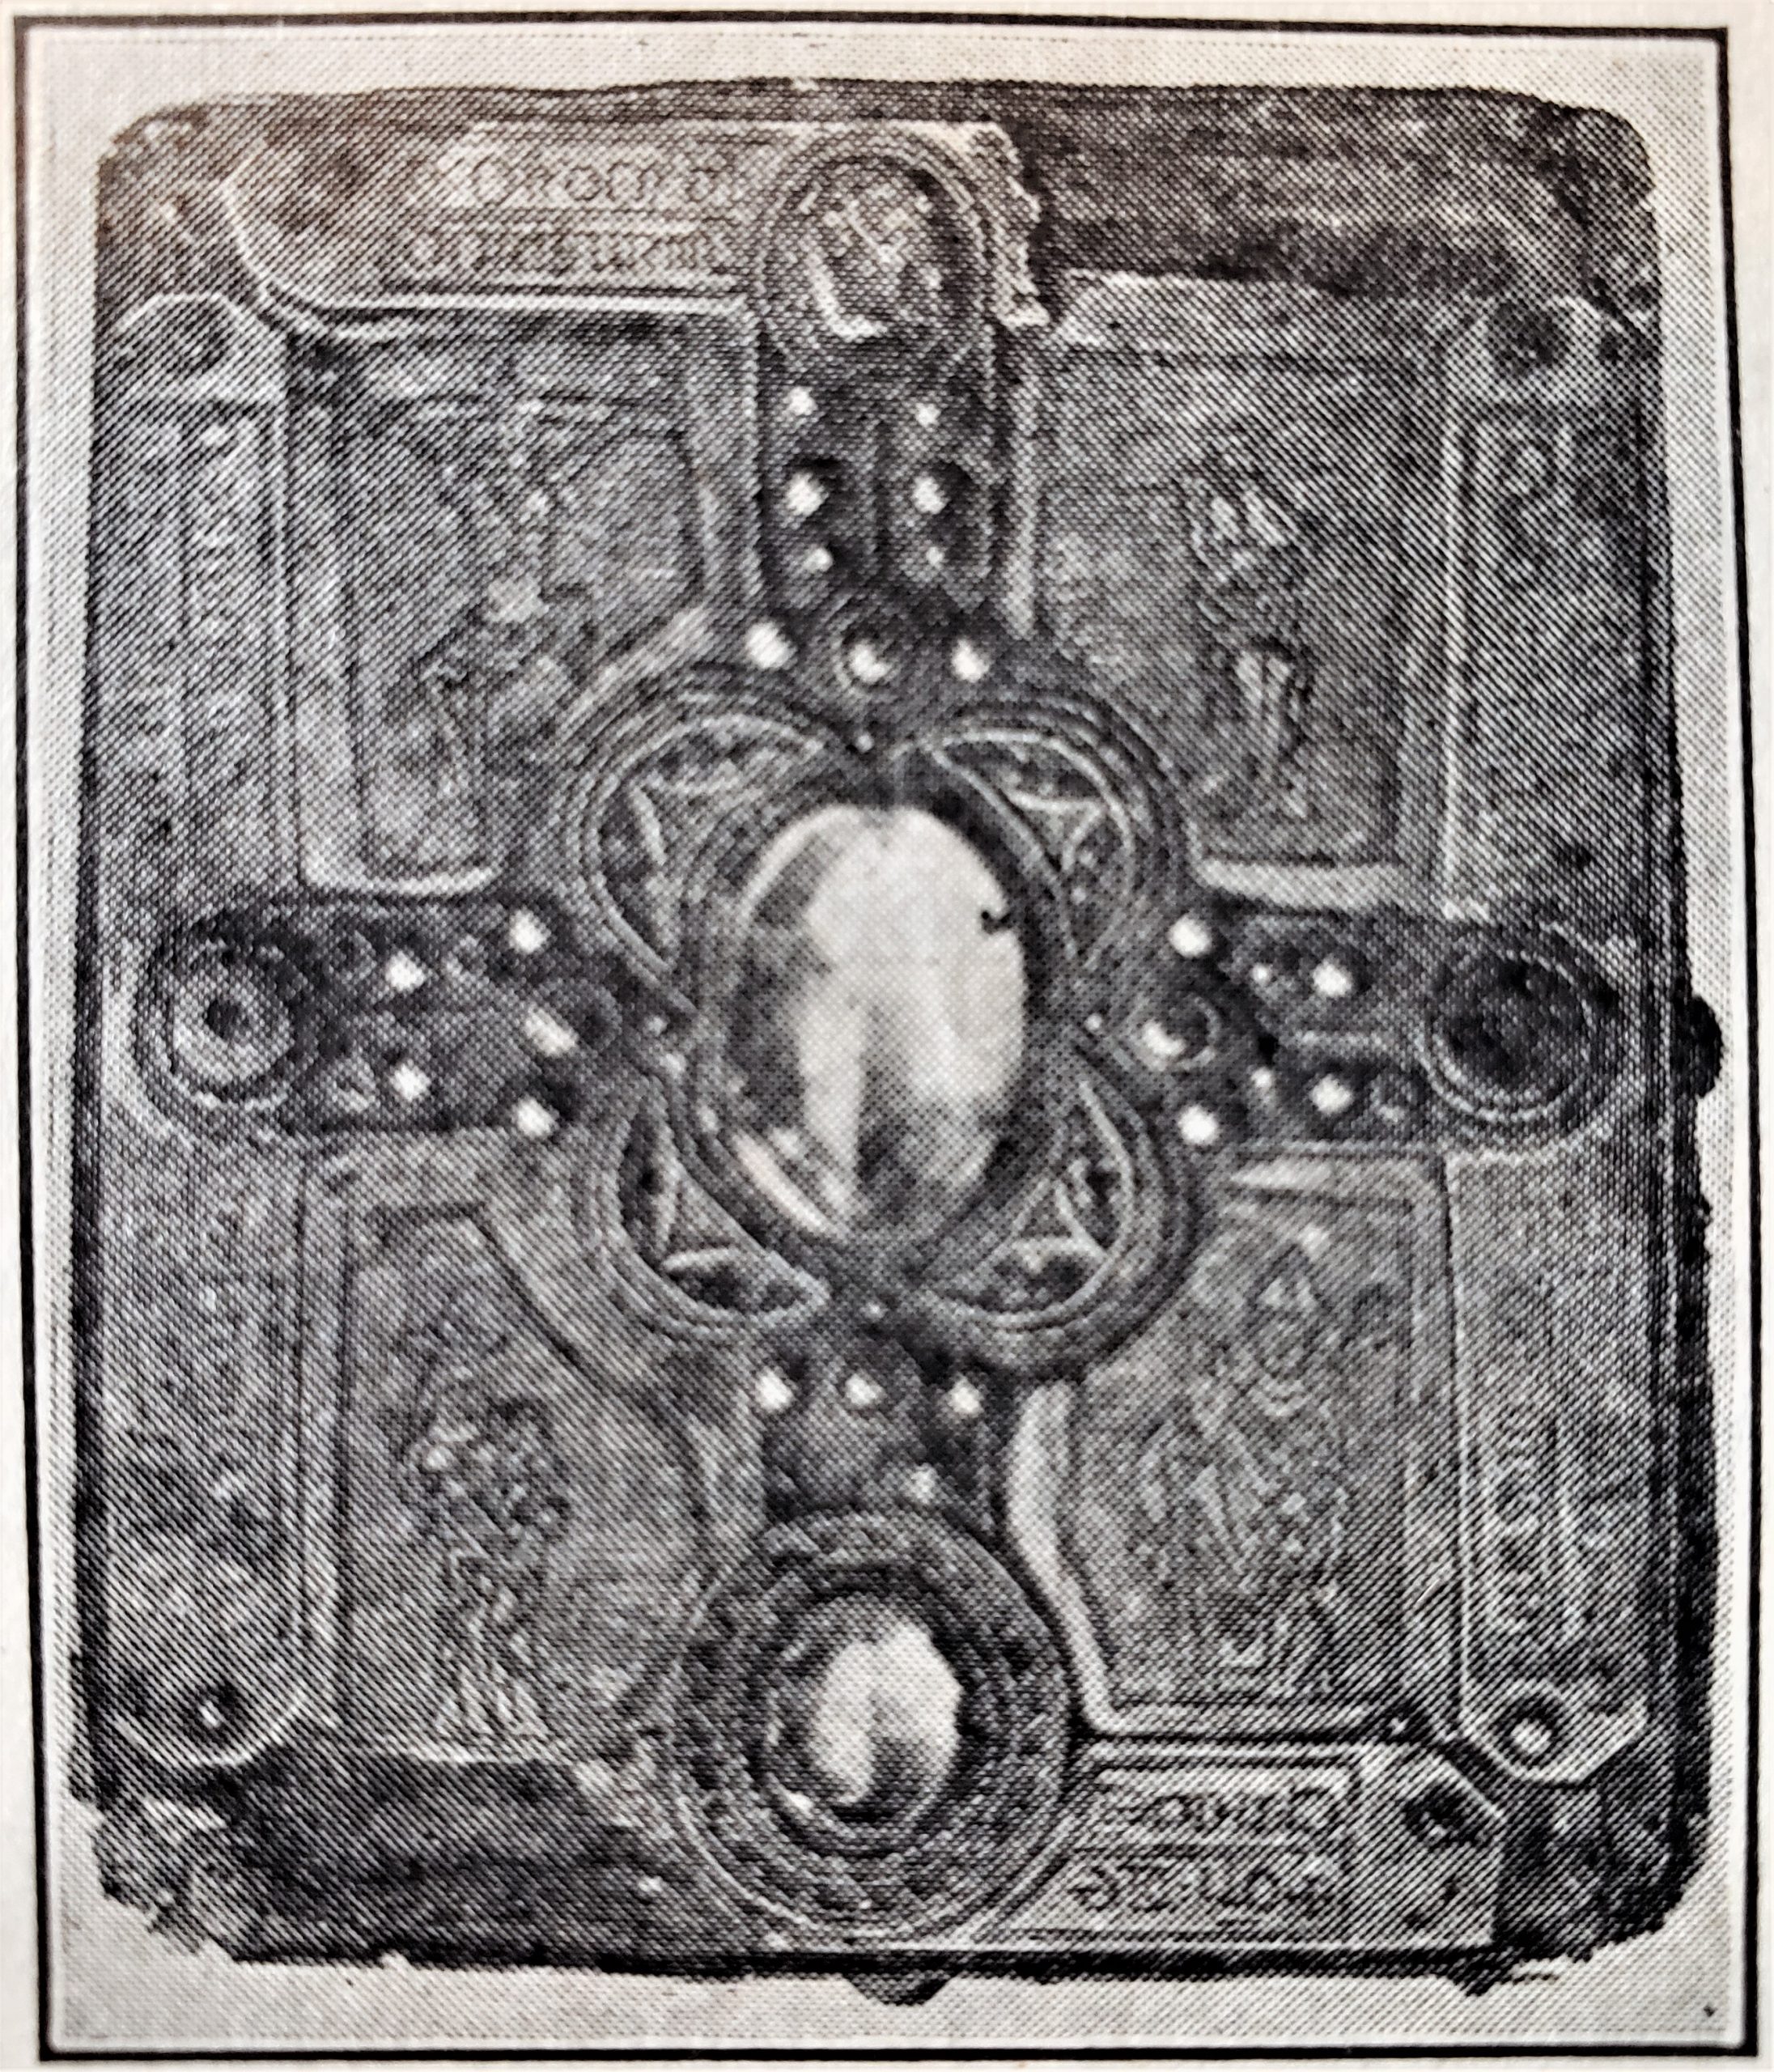 ELEVENTH-CENTURY COVER OF A MANUSCRIPT BOOK Two of the precious stones which once adorned it is still in place. Note the metal strips, the numerous minor stones, and the figures in the spaces around the center. Such elaborate covers are not rare. Wooden plates took the place of what is cardboard in present-day book covers.